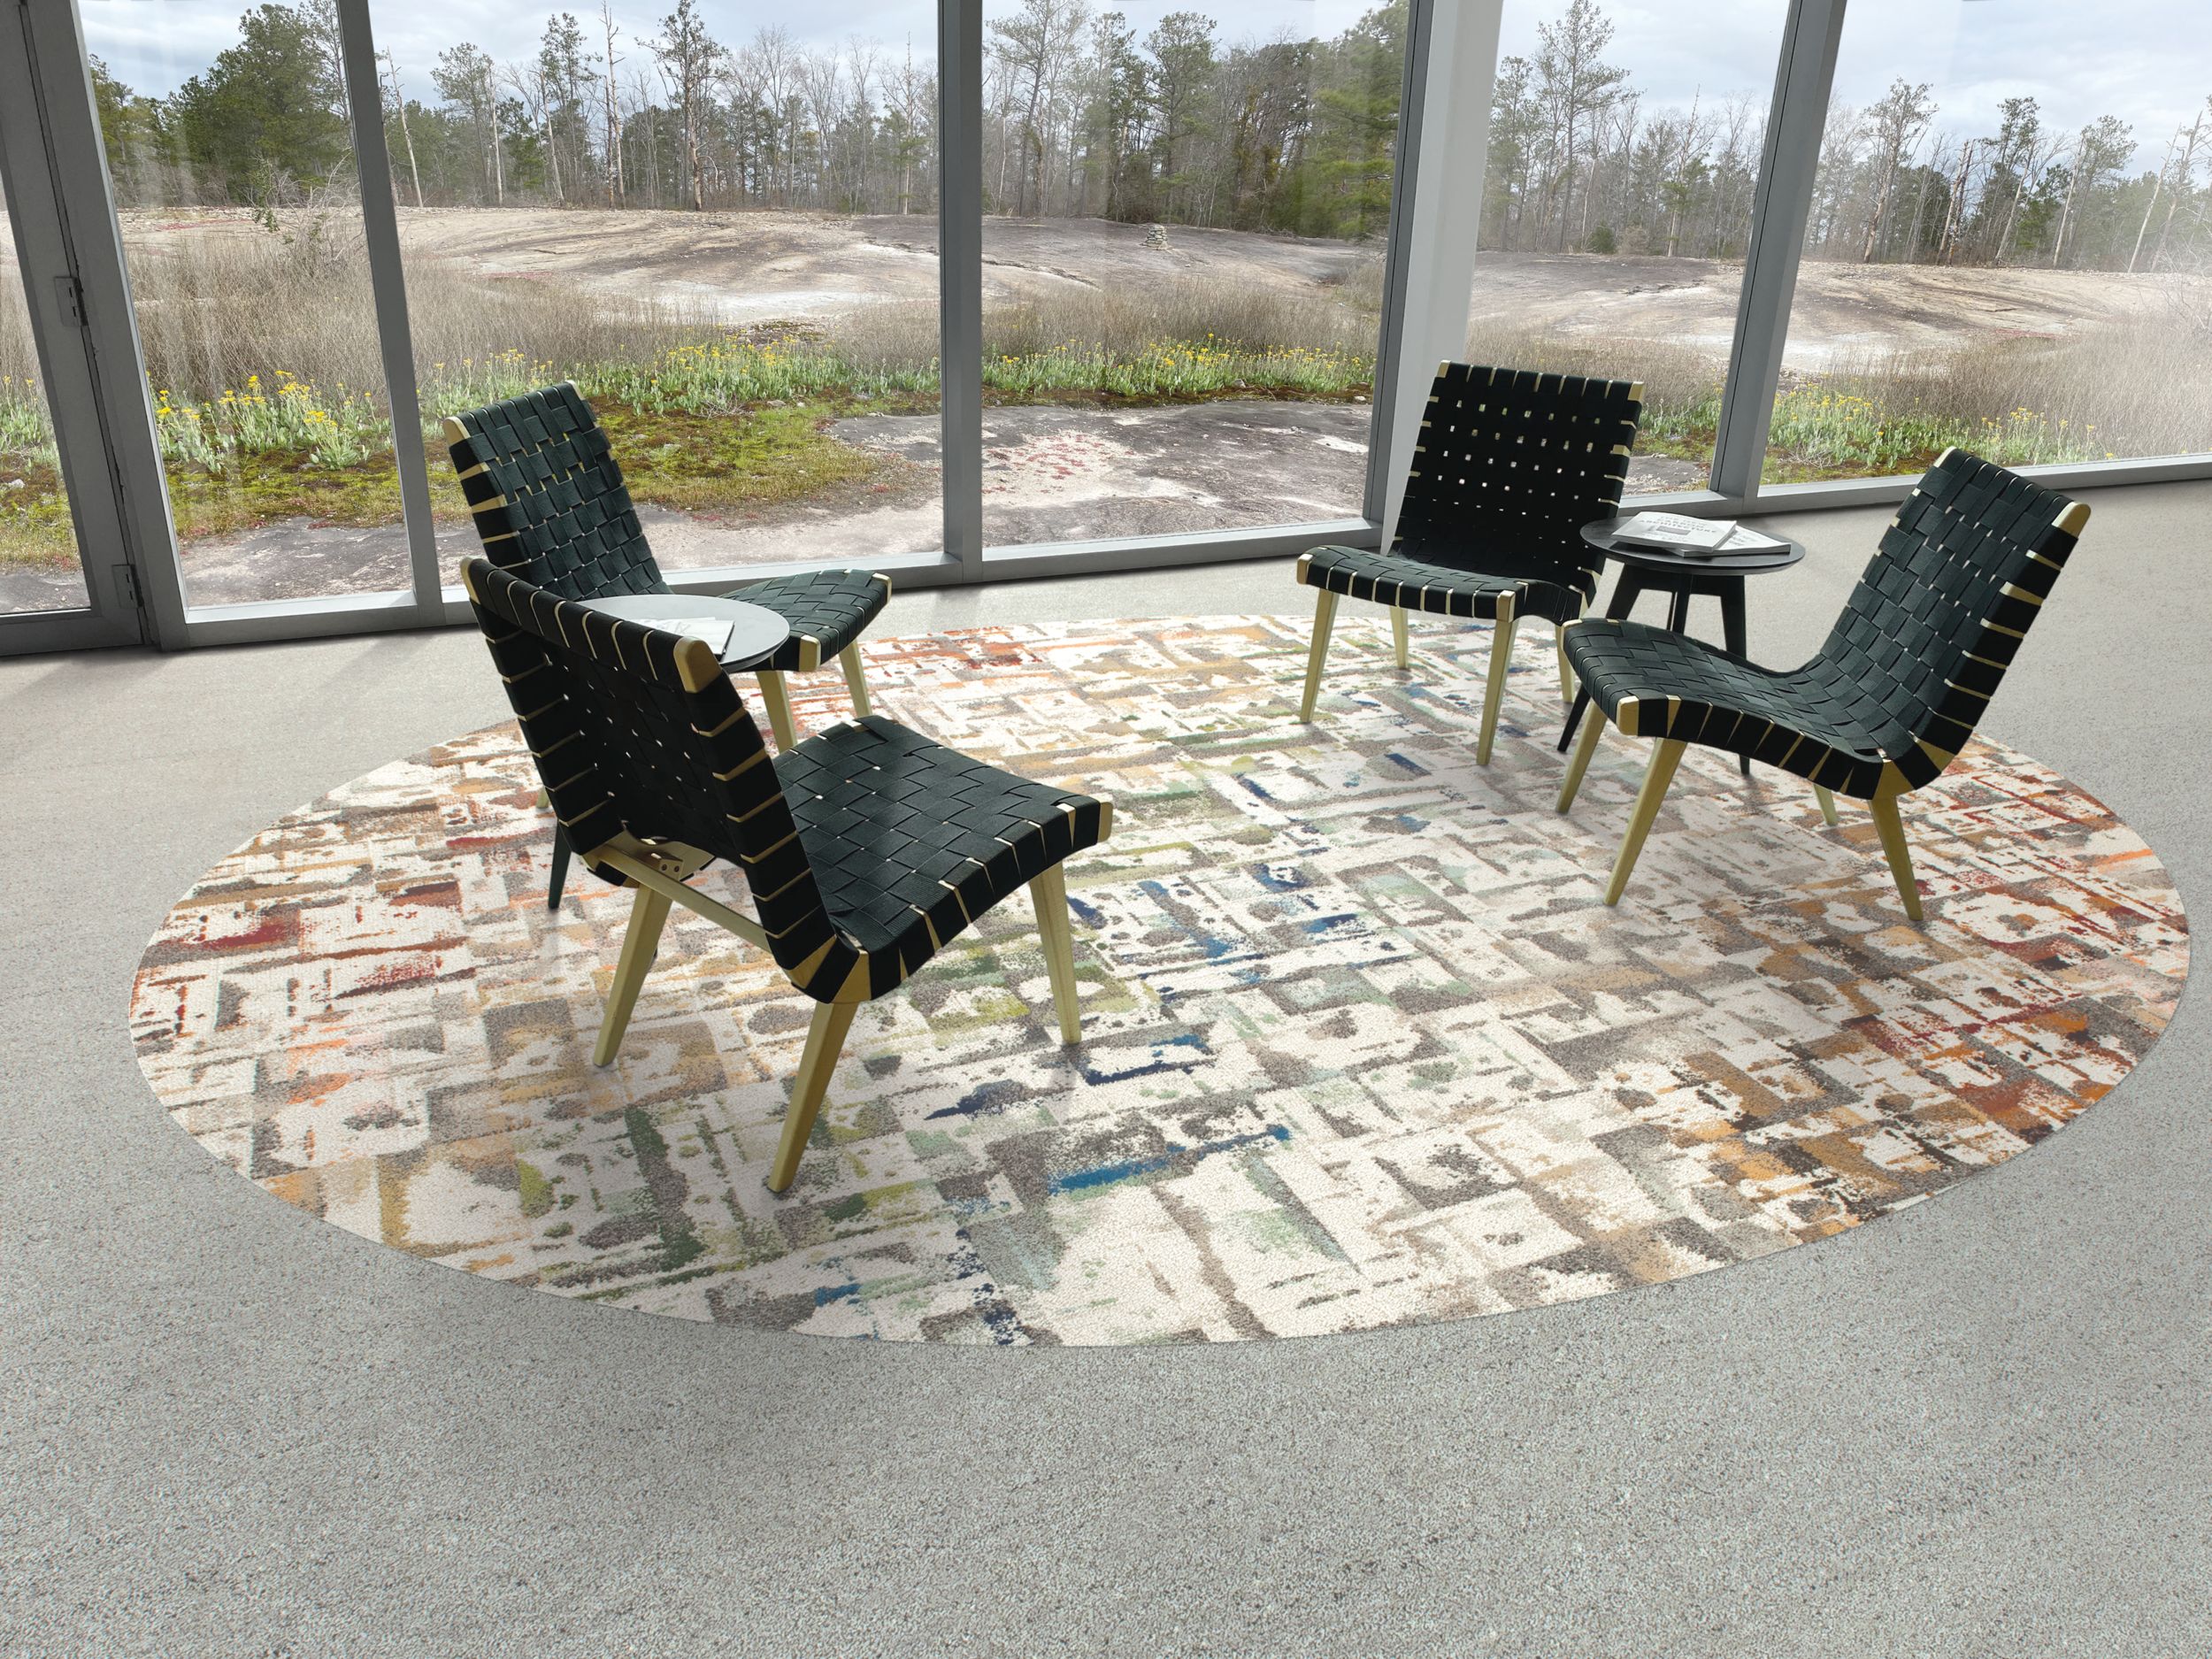 Interface Panola Mountain and Rockland Road carpet tile in glass-enclosed seating area with four chairs imagen número 7